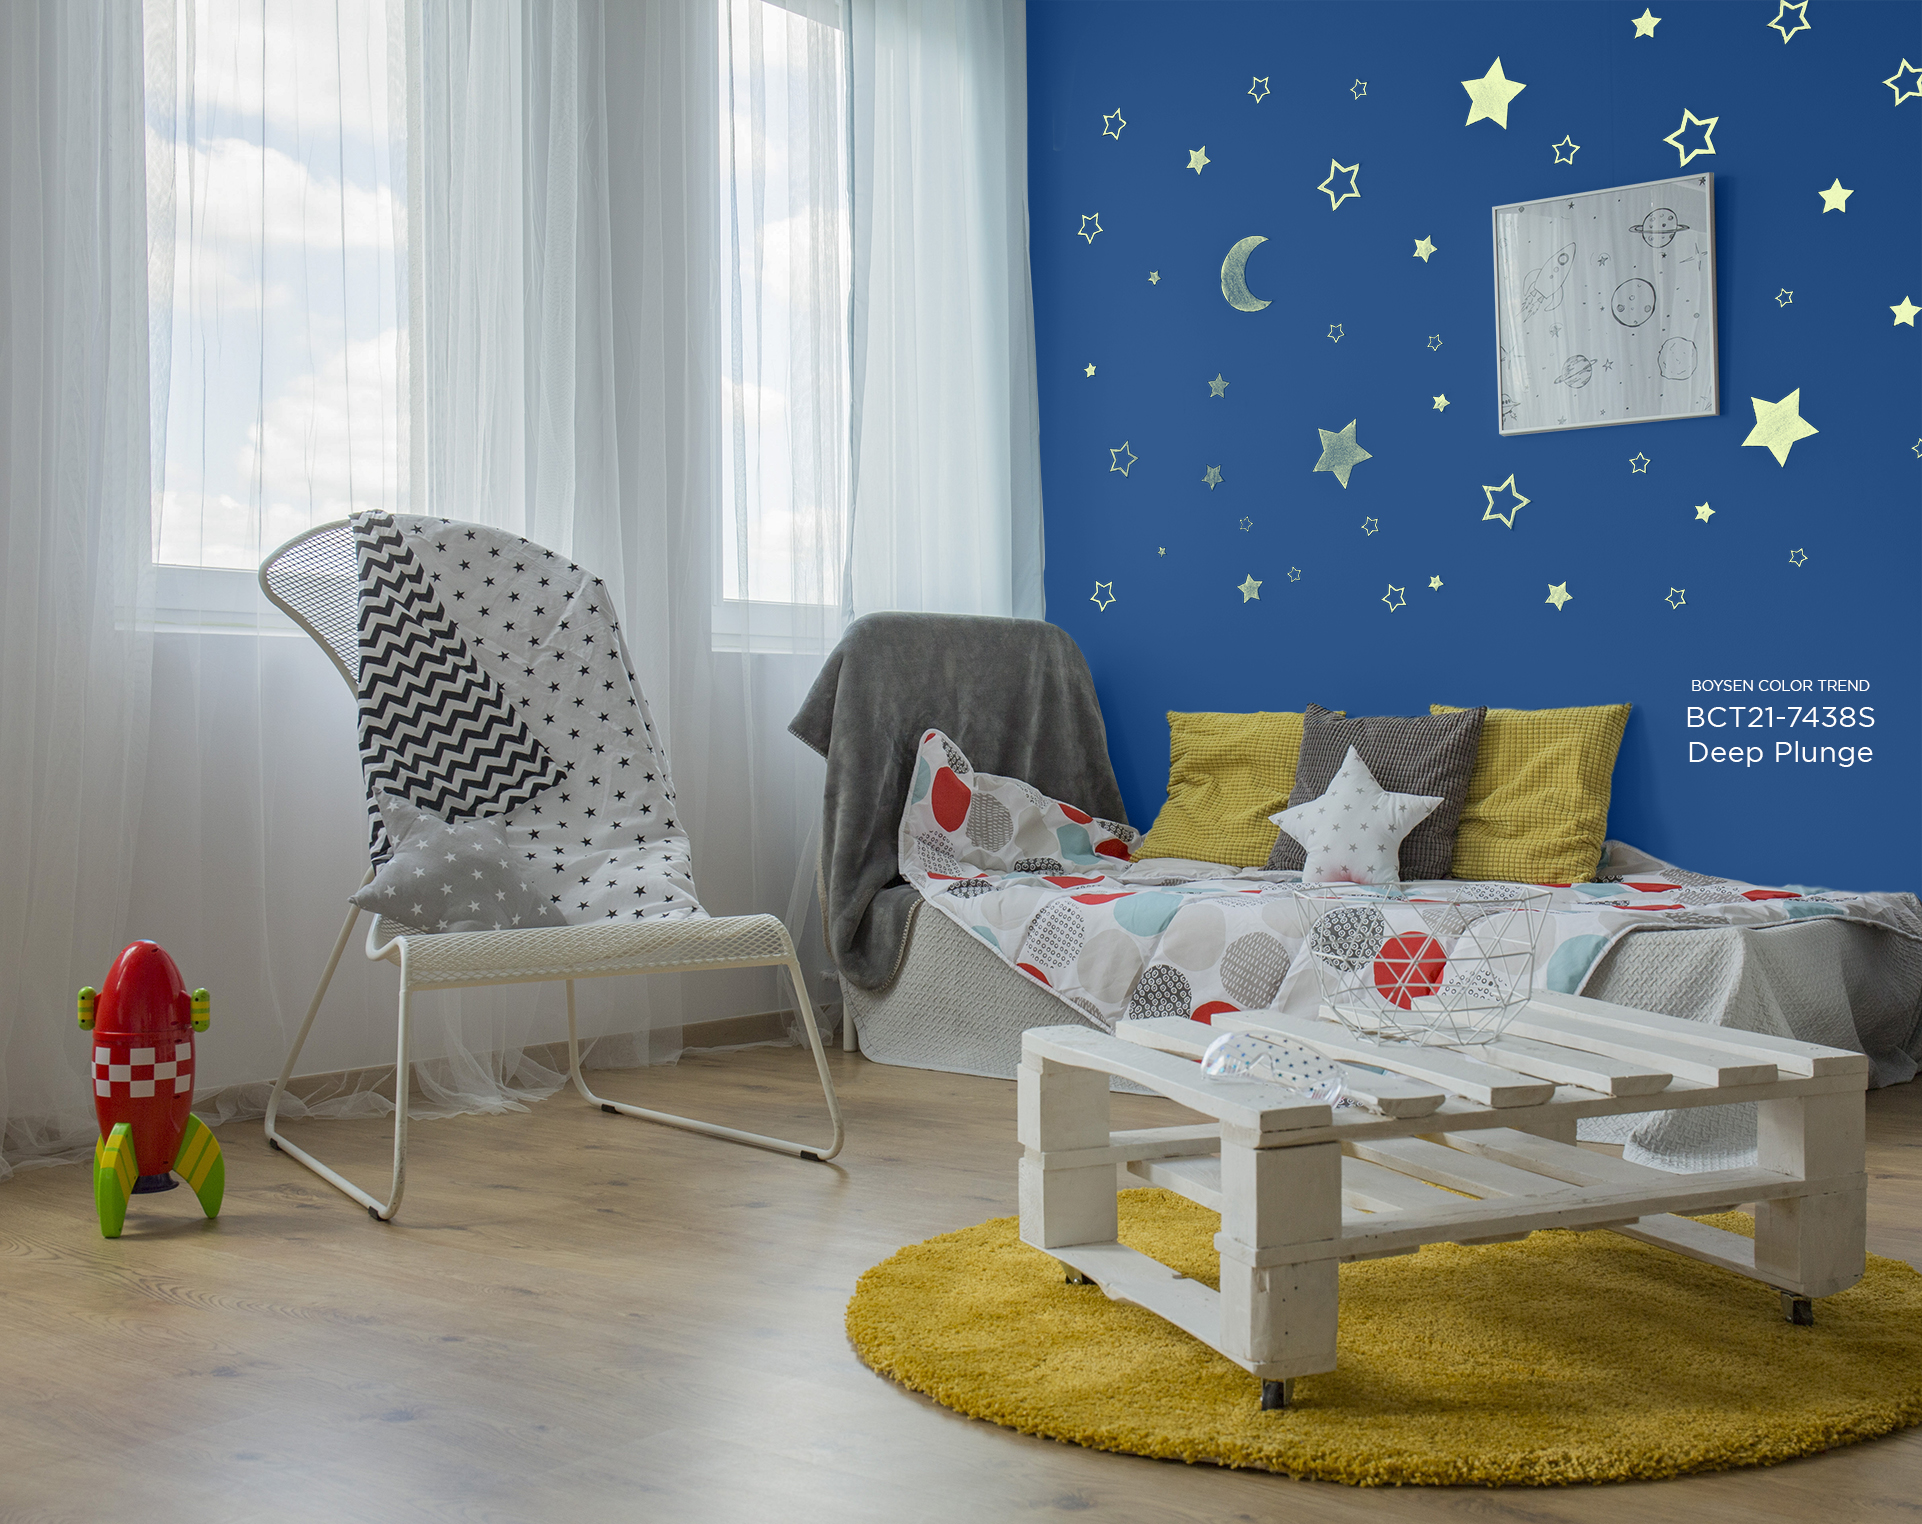 Kid’s Bedroom Wall Color Ideas with the Move Palette | MyBoysen